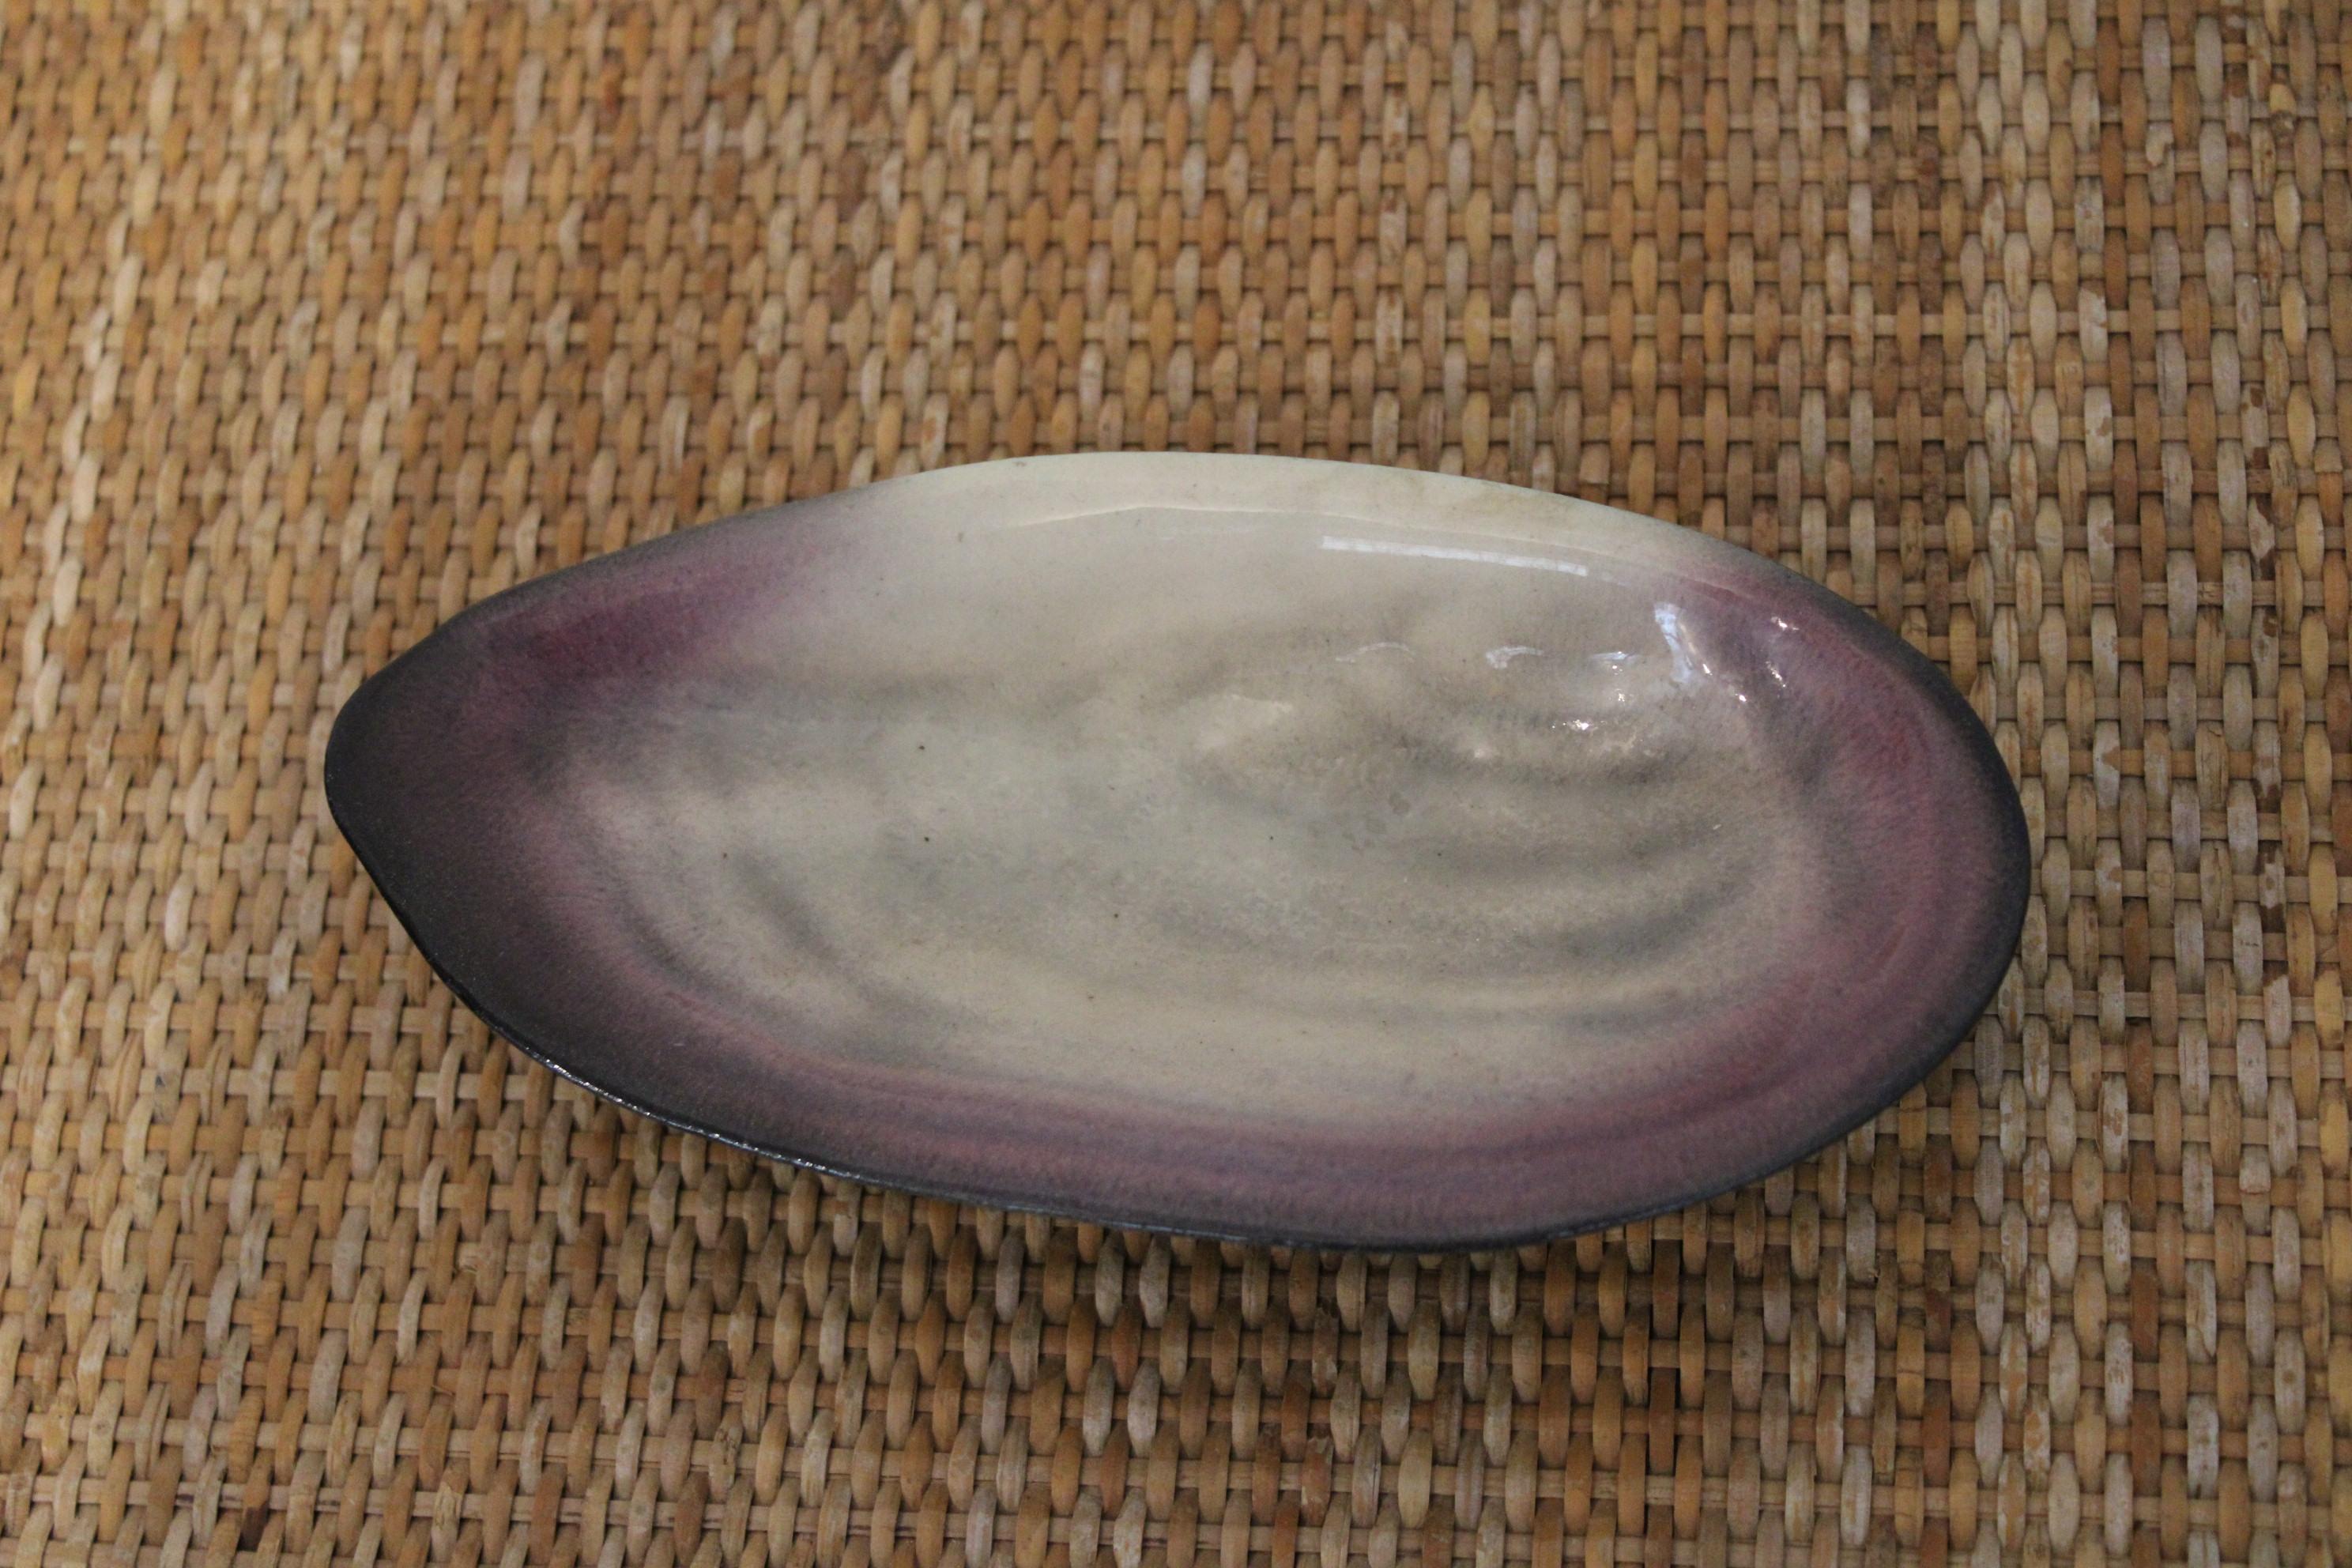 Ceramic shell dish by Pol Chambost (1906-1983)
Circa 1950
Signed under the base